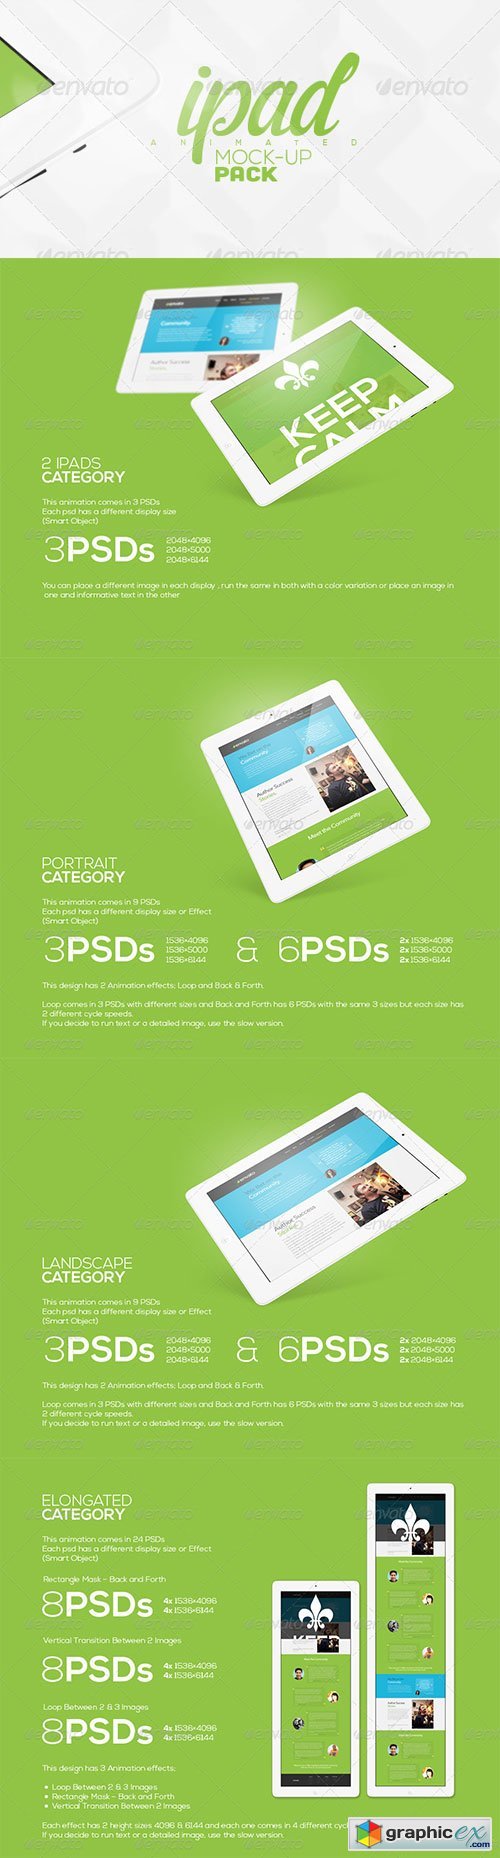 Animated Tablet Mock-up Pack